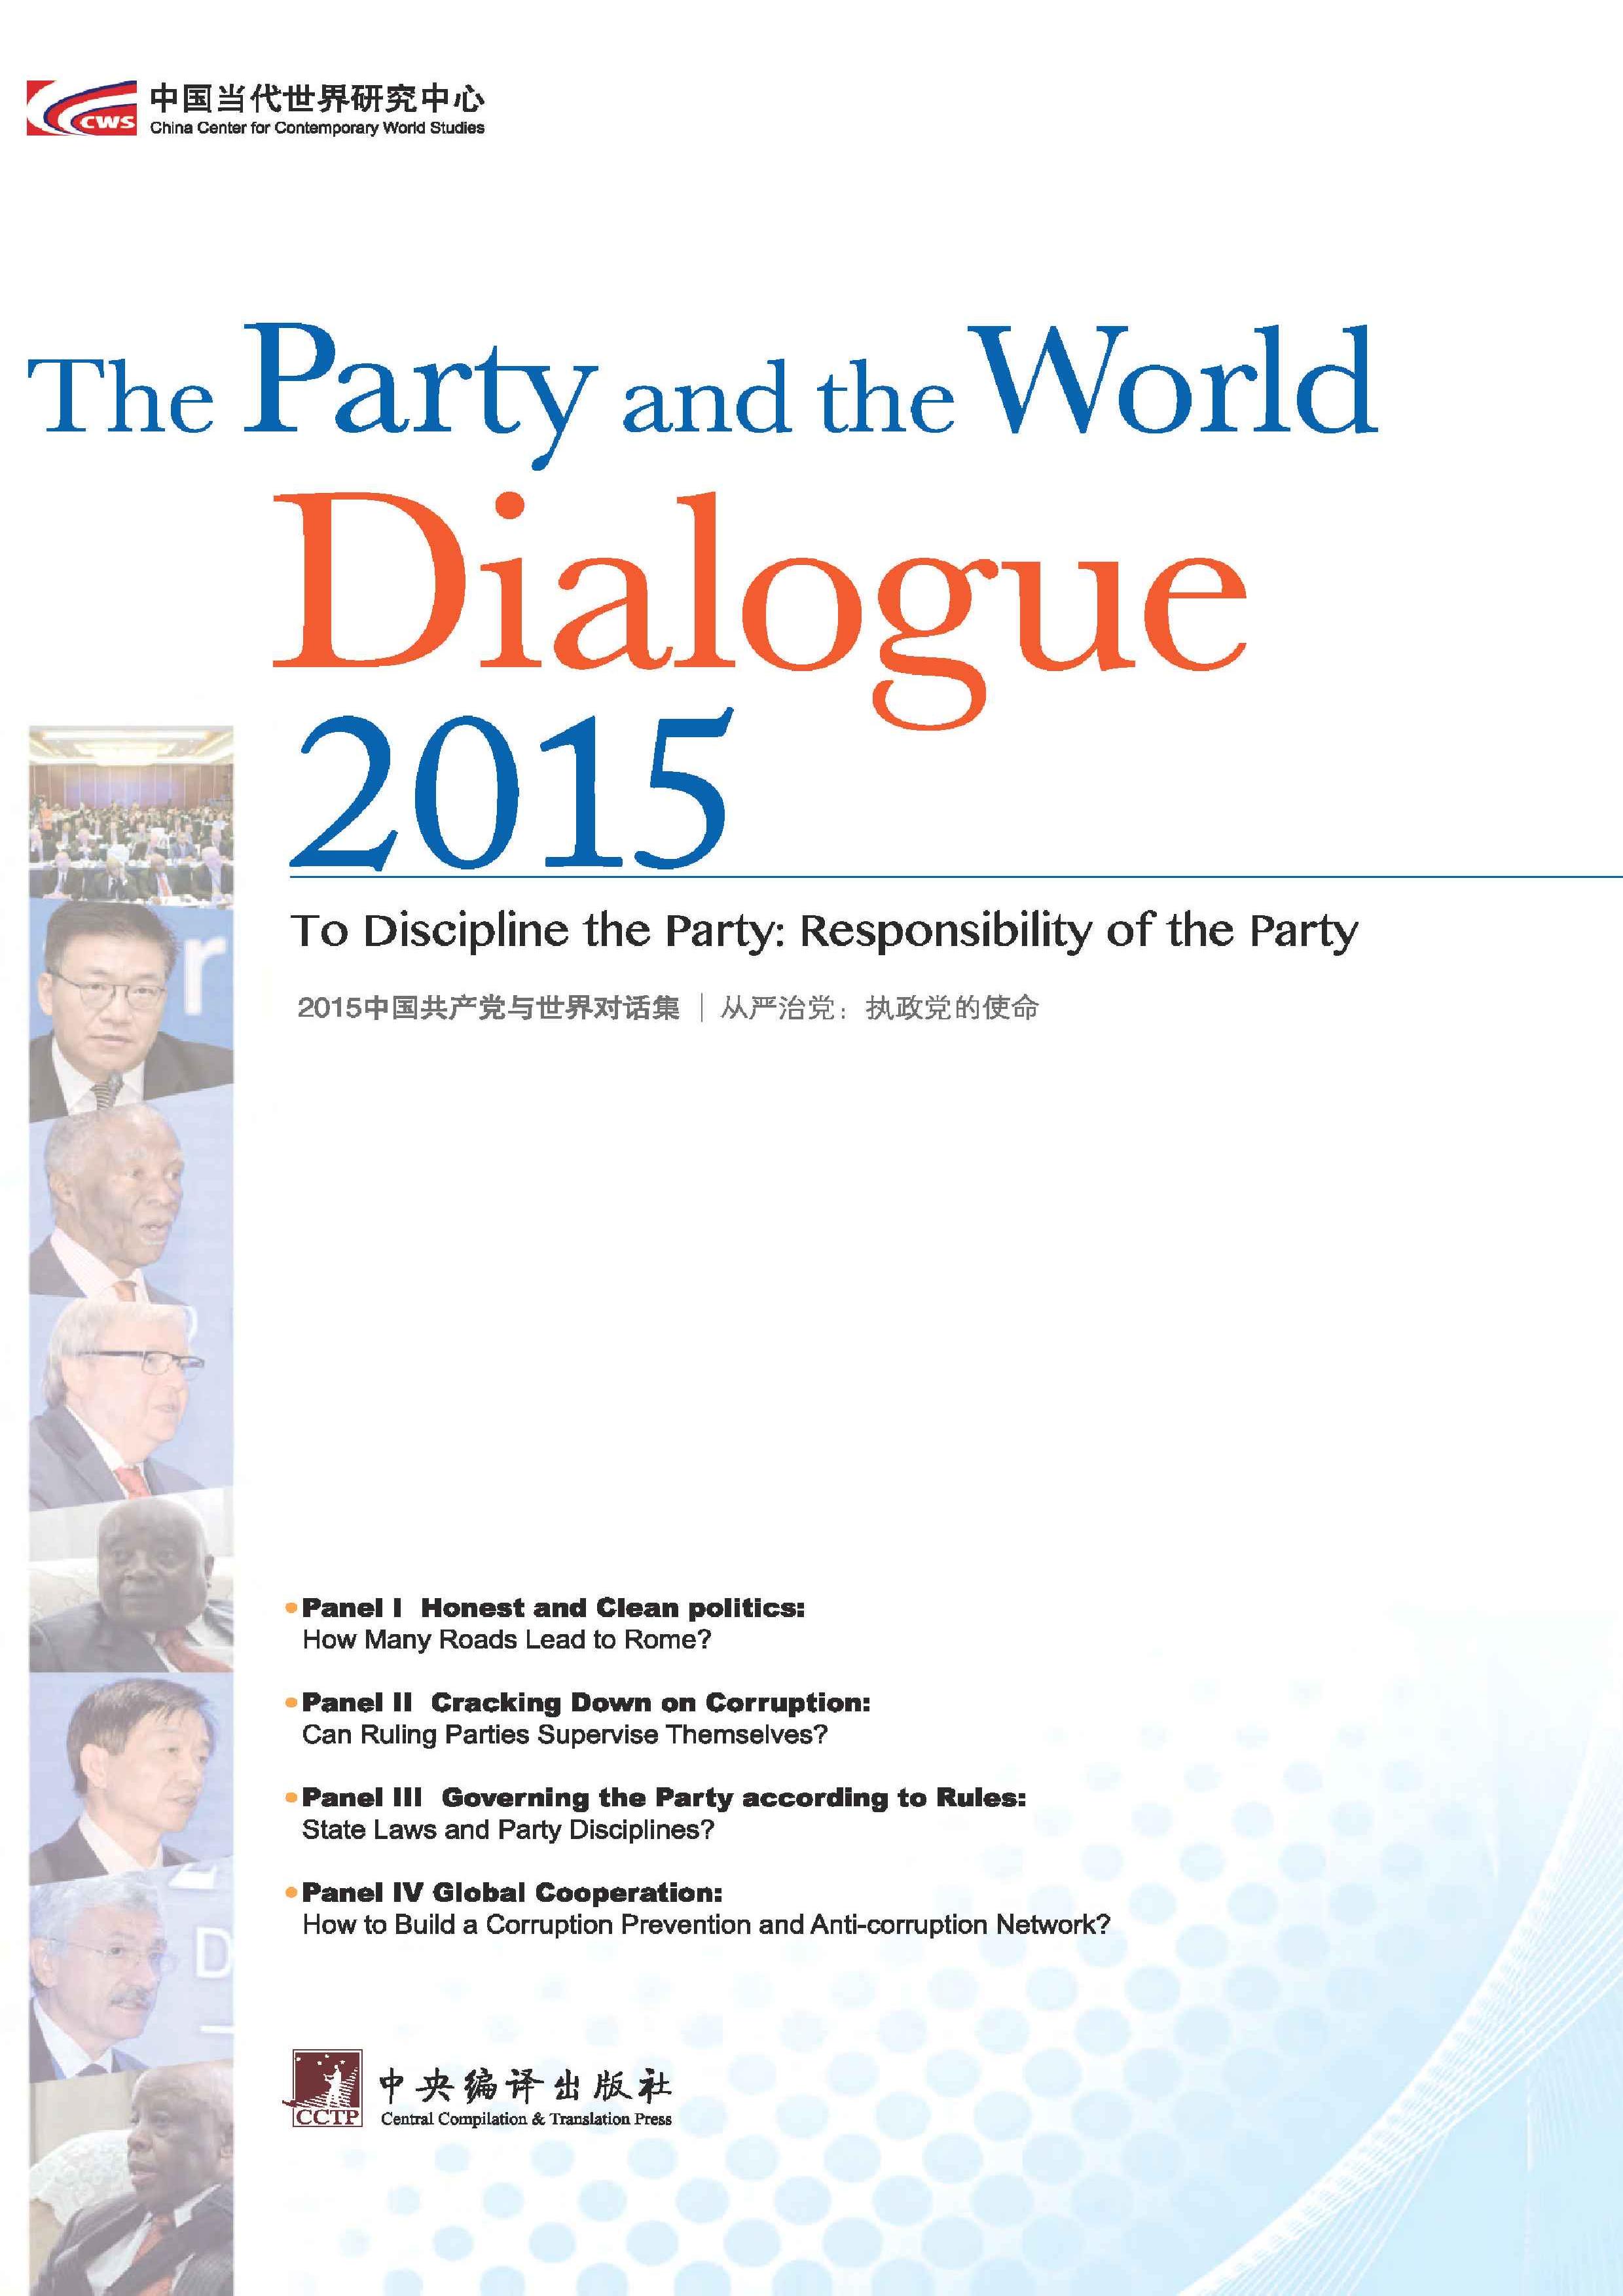 The Party and the World Dialogue 2015